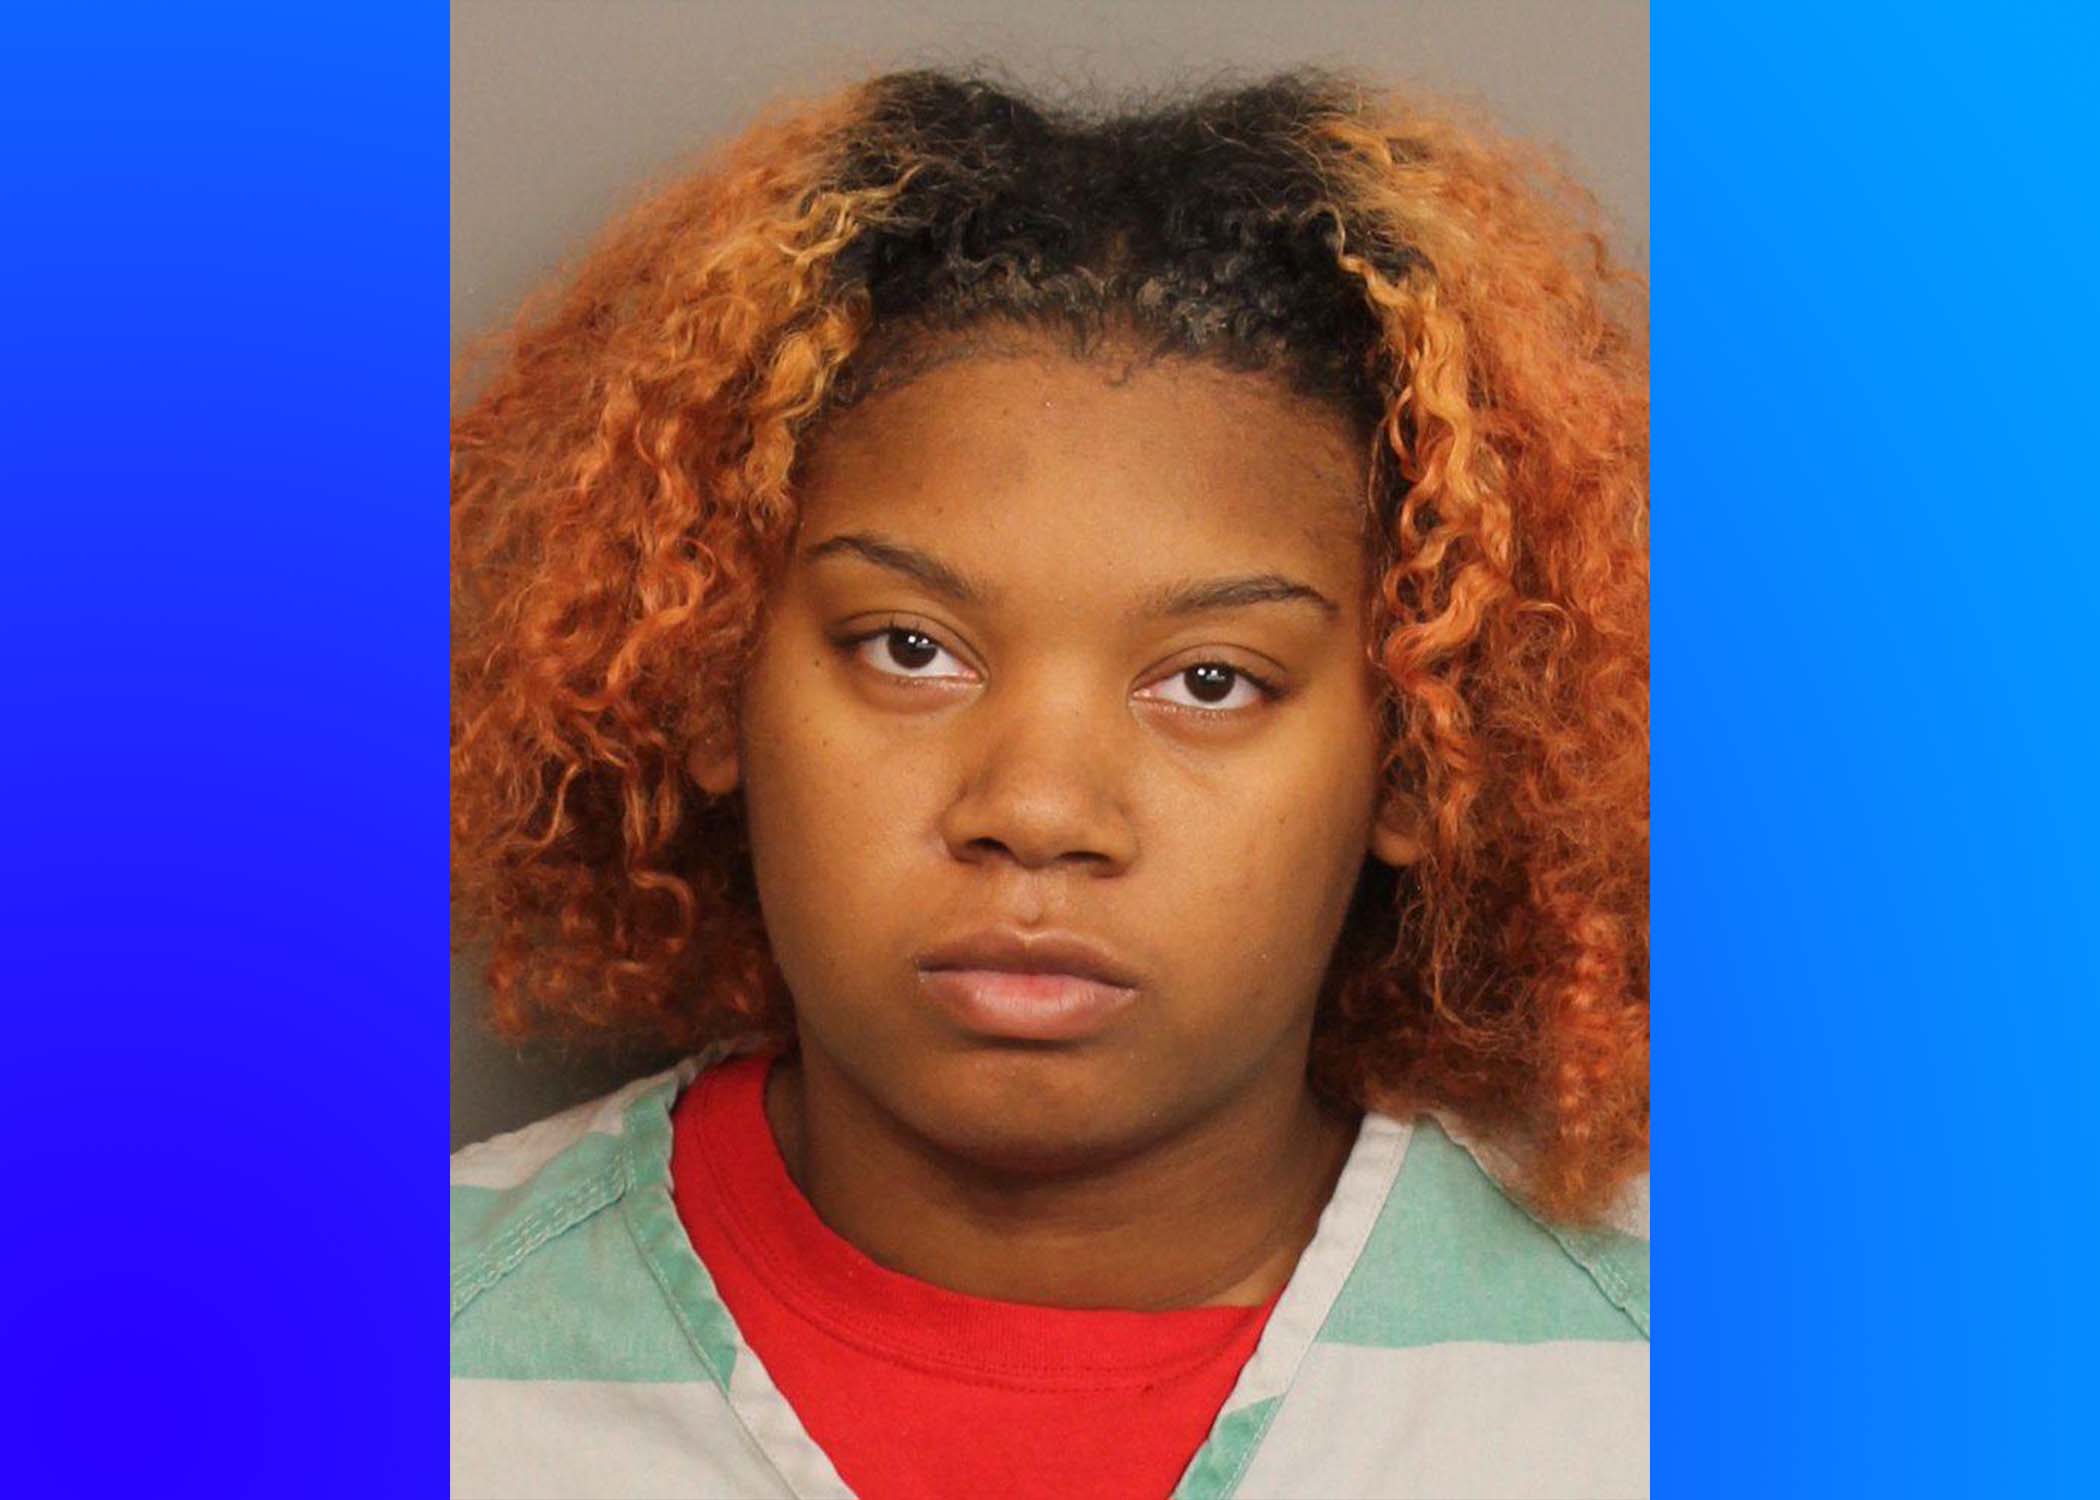 UPDATE: Suspect arrested in connection to the murder of a Birmingham woman